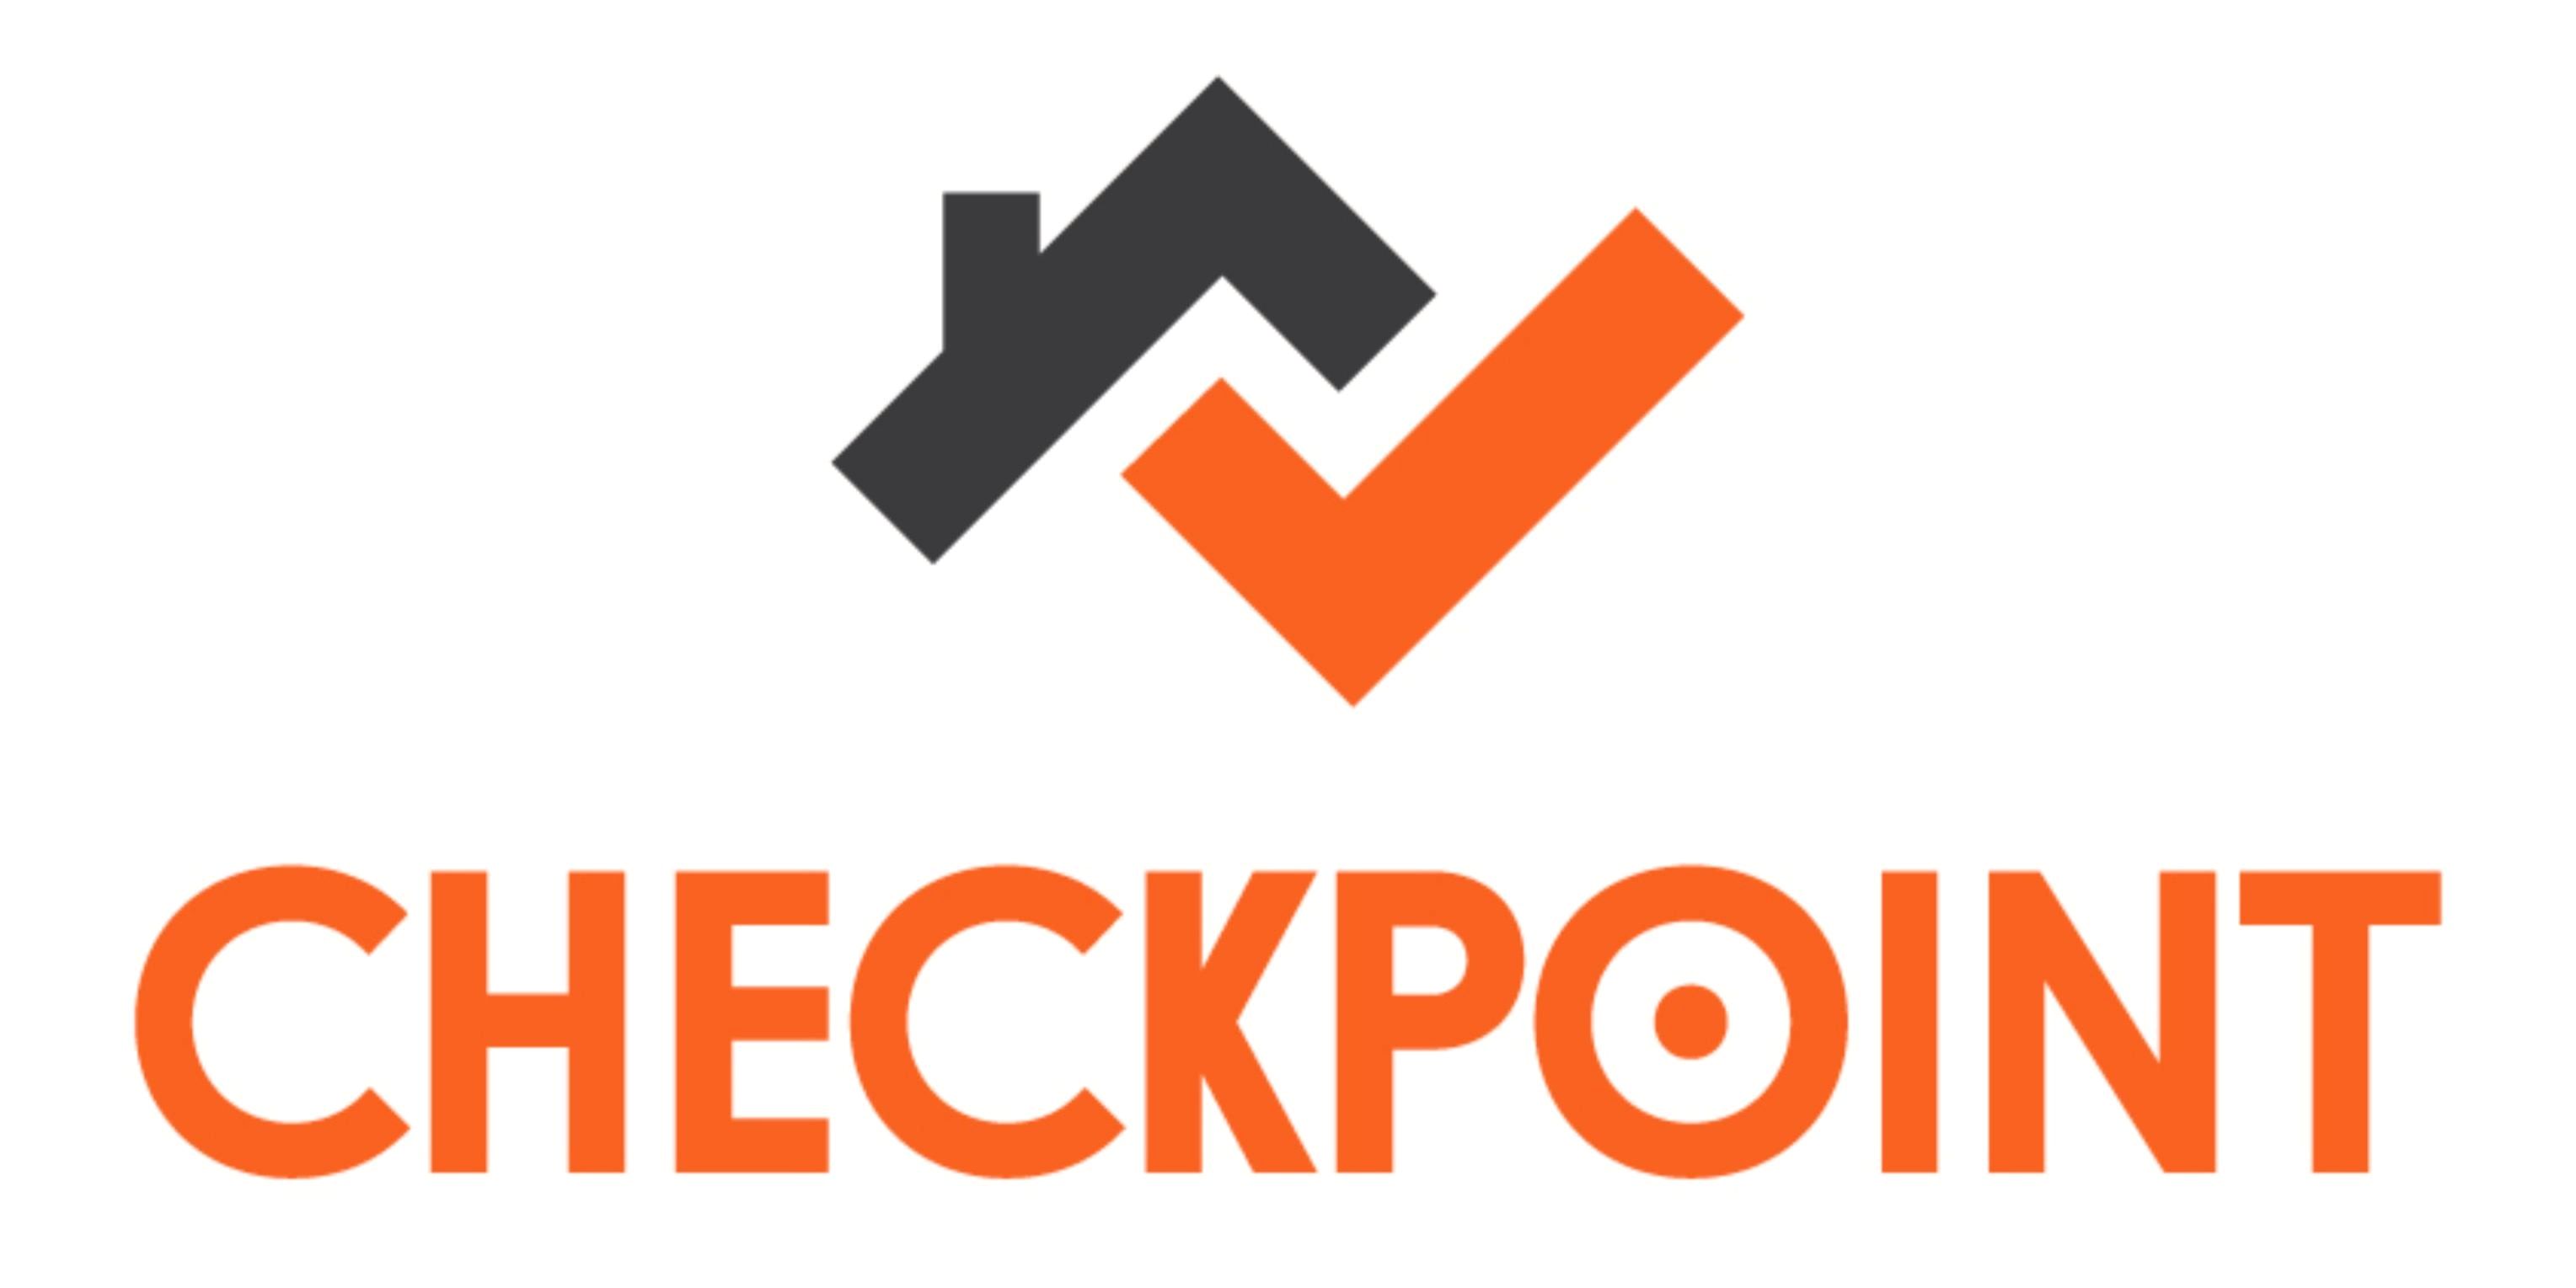 Checkpoint Real Estate